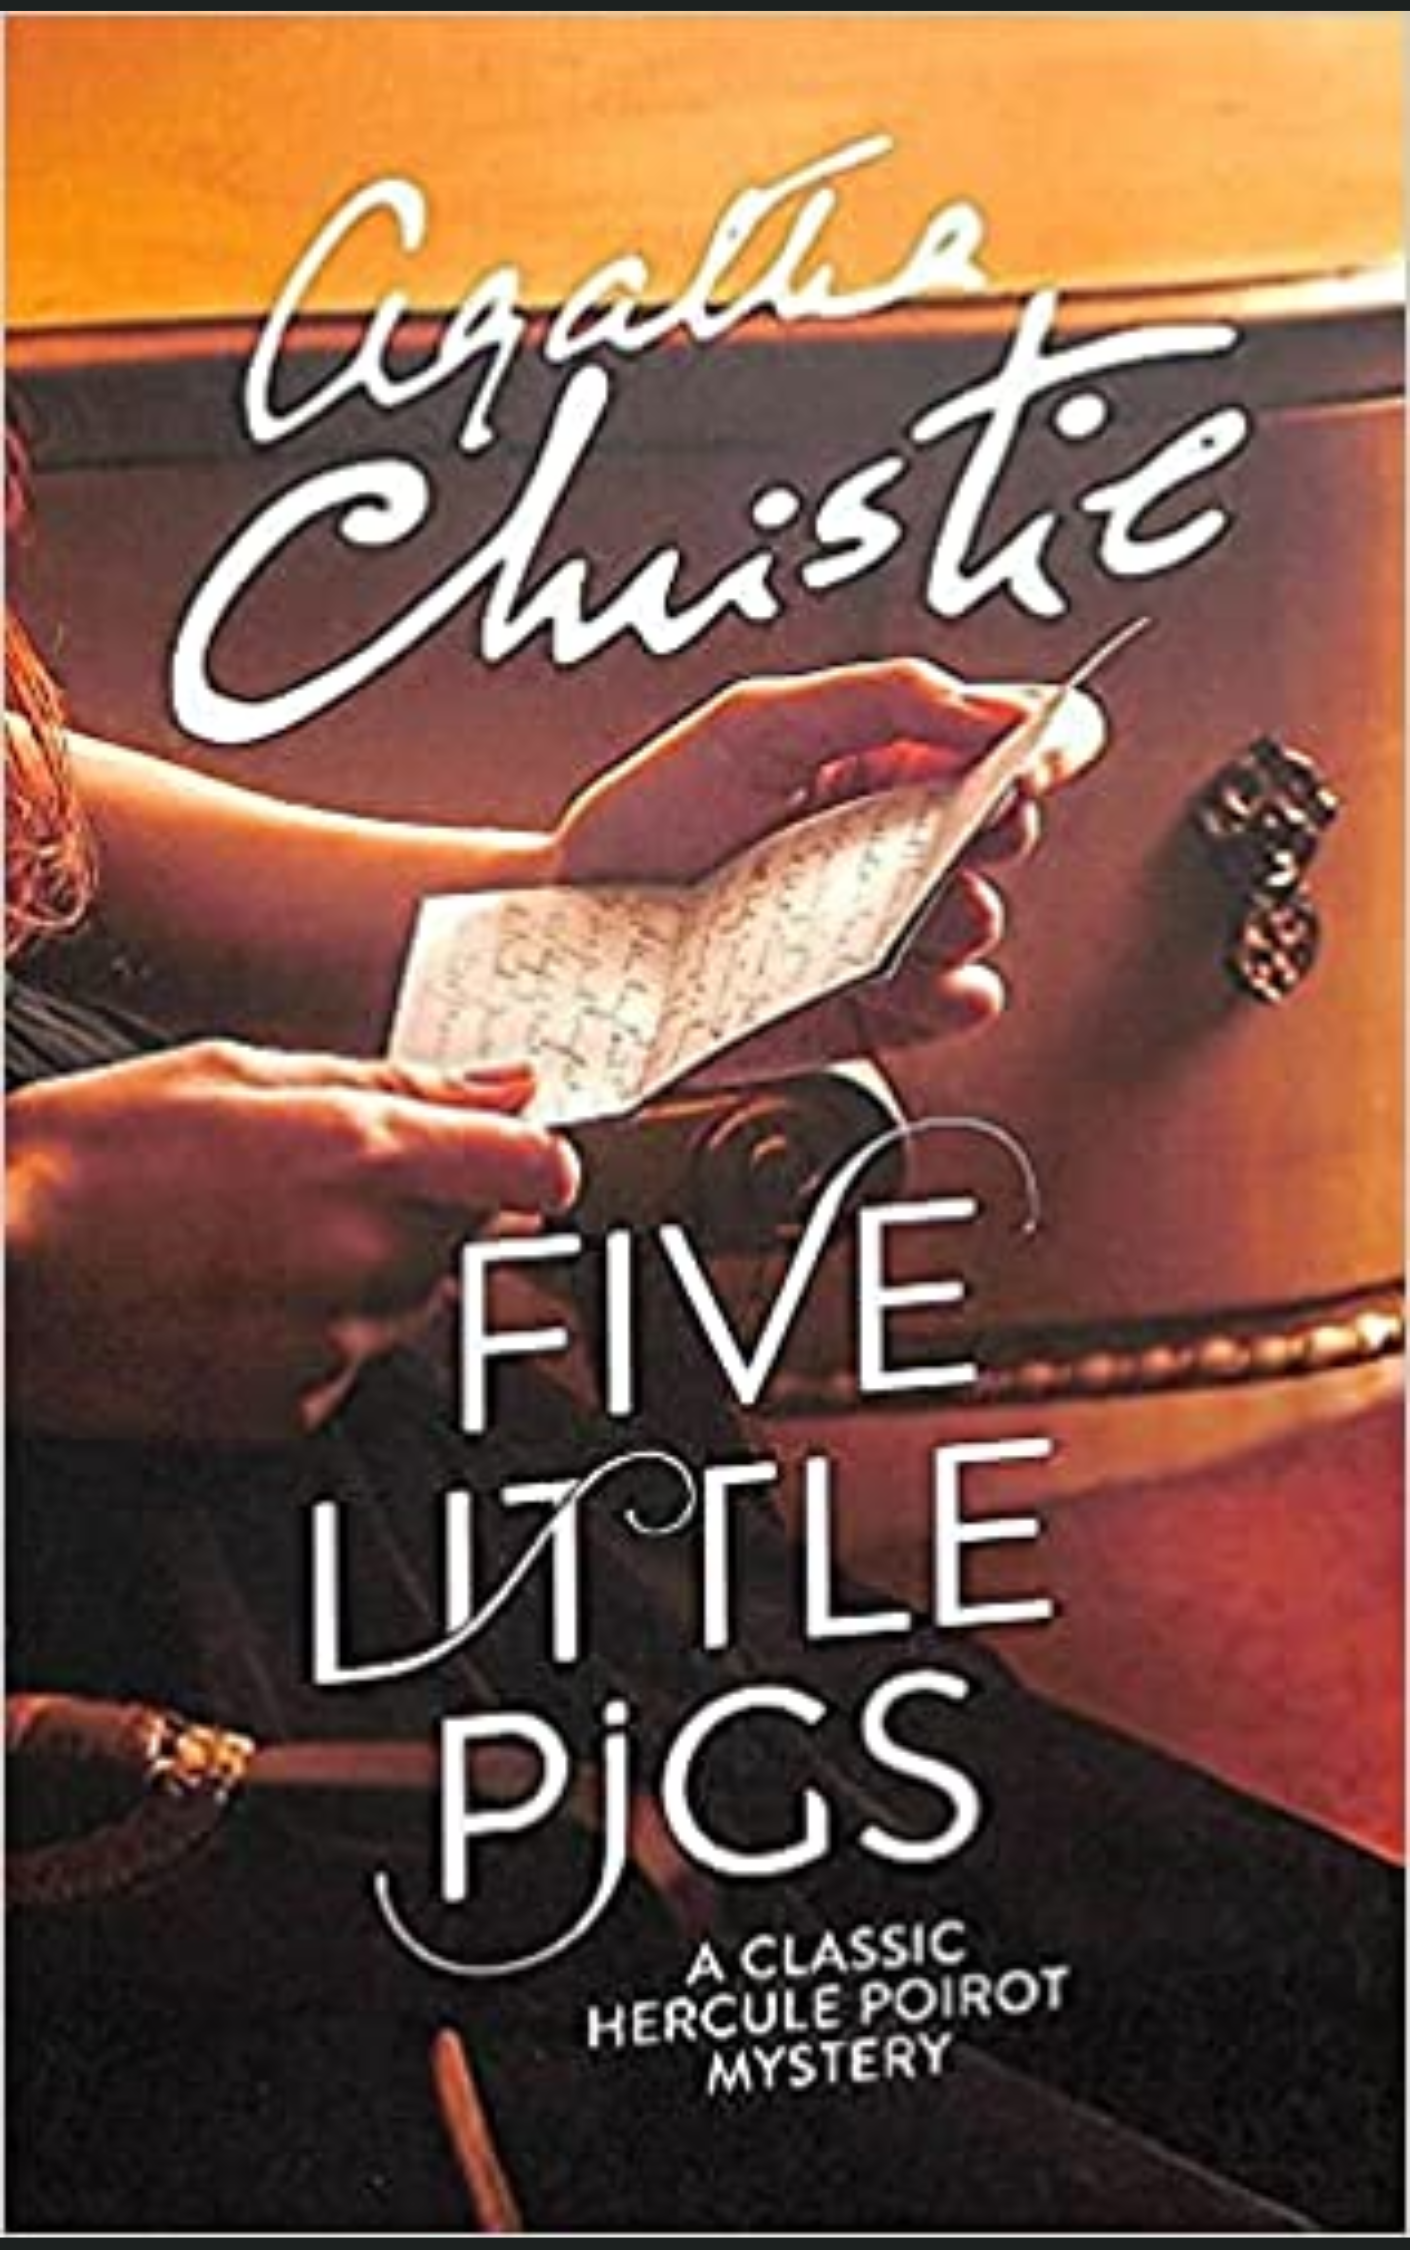 FIVE LITTLE PIGS by AGATHA CHRISTIE